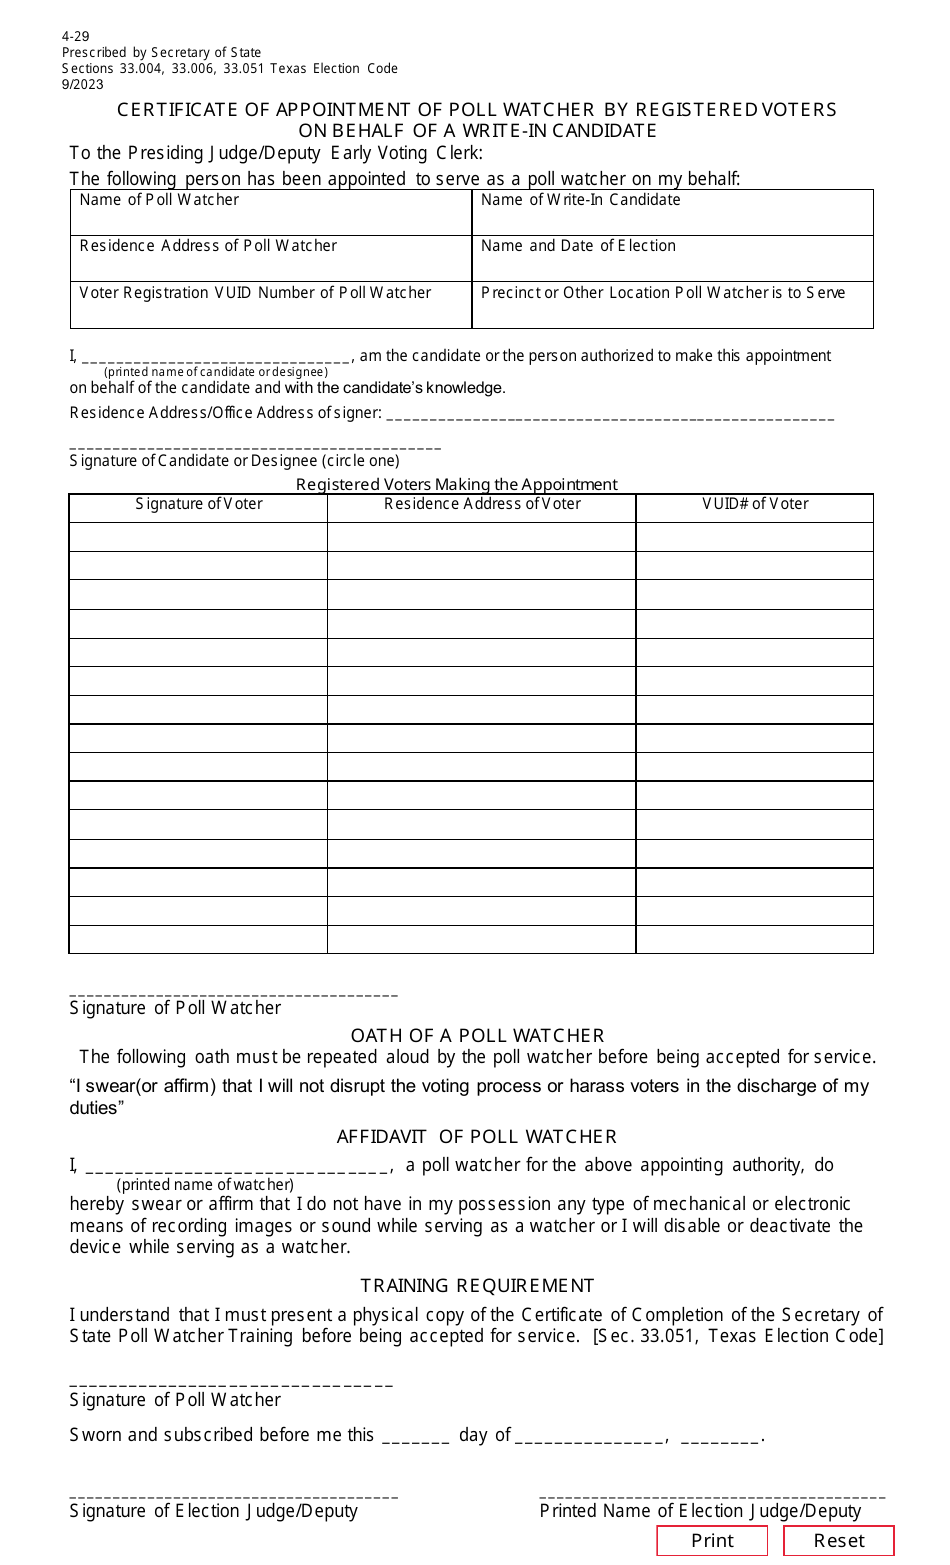 Form 4-29 Certificate of Appointment of Poll Watcher by Registered Voters on Behalf of a Write-In Candidate - Texas, Page 1